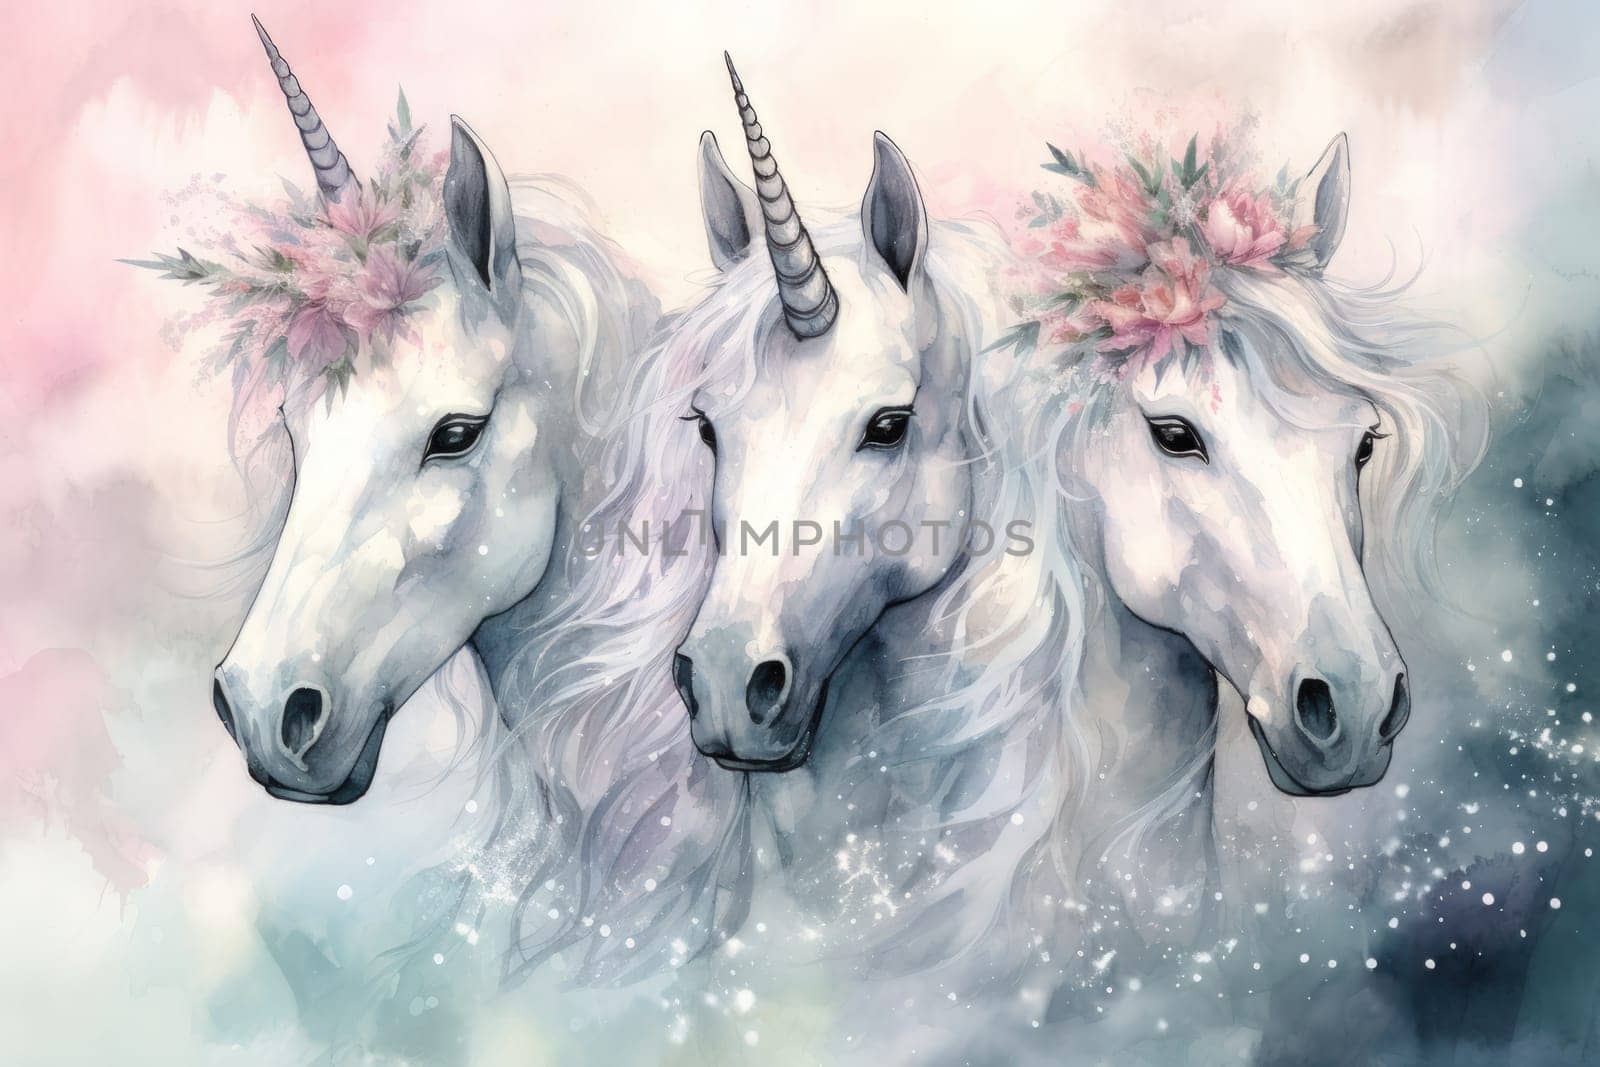 Stunning mythical creatures with majestic presence and shimmering silver horns.